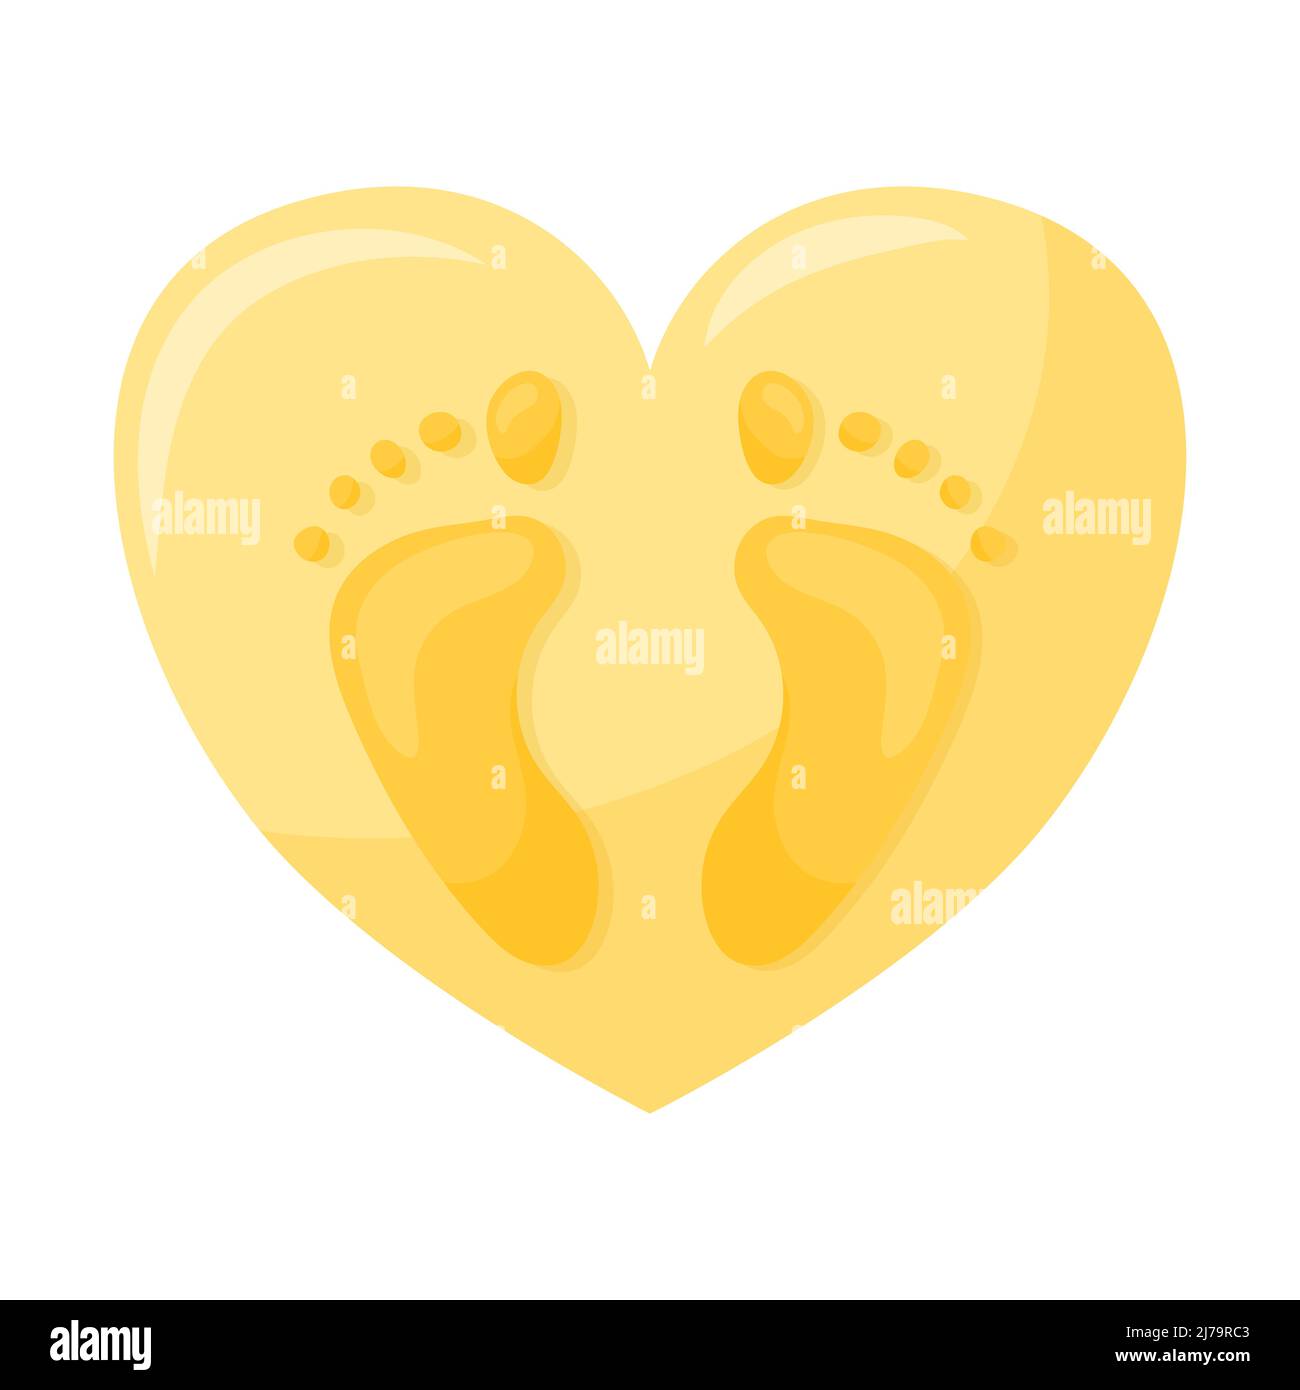 Footprints of human feet with fingers. Abstract footprints in the shape of a heart. Vector illustration in a flat cartoon style isolated on a white ba Stock Vector